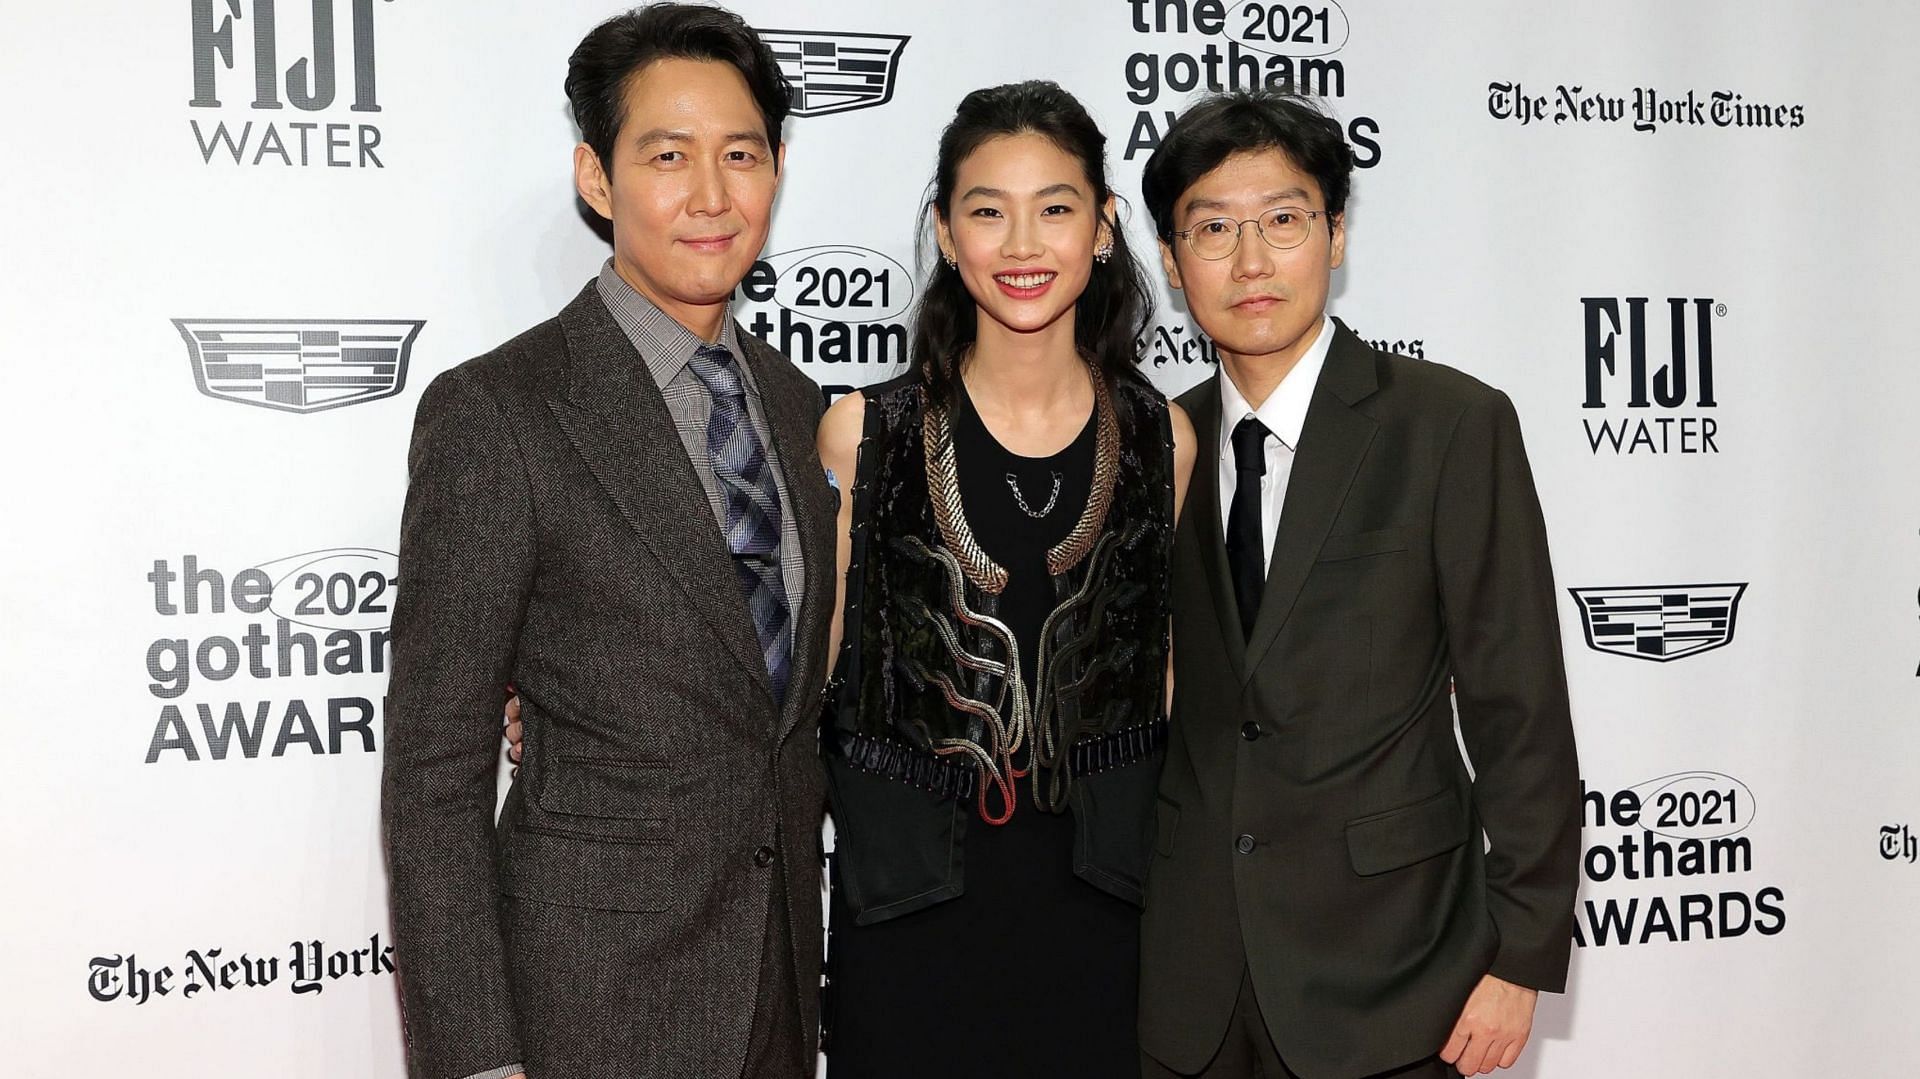 Squid Game was represented by Lee Jung Jae (left), Jung Ho Yeon (Center), and Hwang Dong Hyuk (right). (Image via IndiaWire)